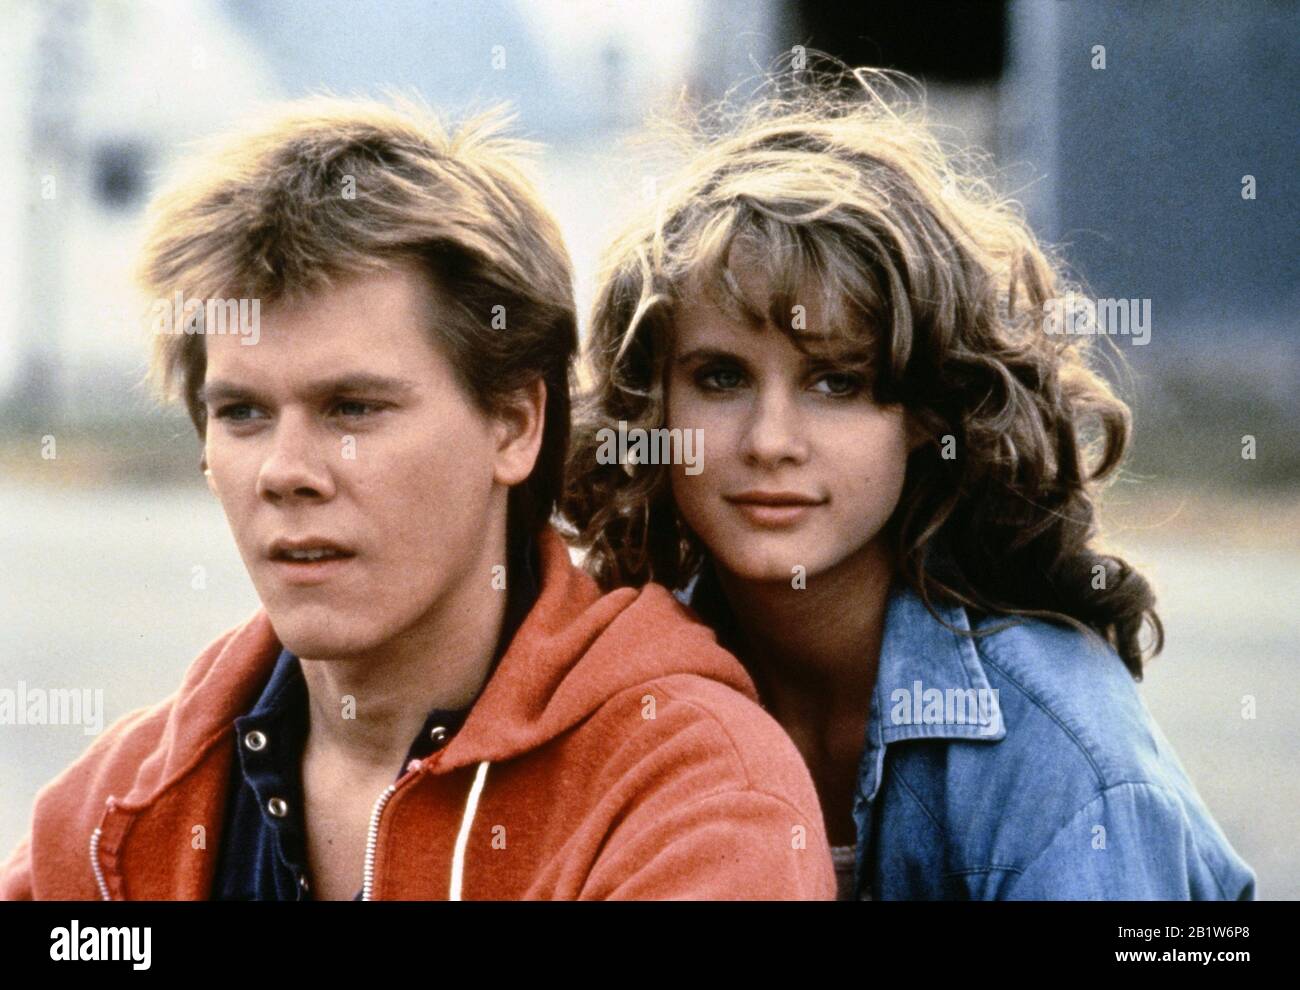 Lori Singer, Kevin Bacon, 'Footlow' (1984) Photo Credit: Paramount / The Hollywood Archive File Référence # 33962-279tha Banque D'Images